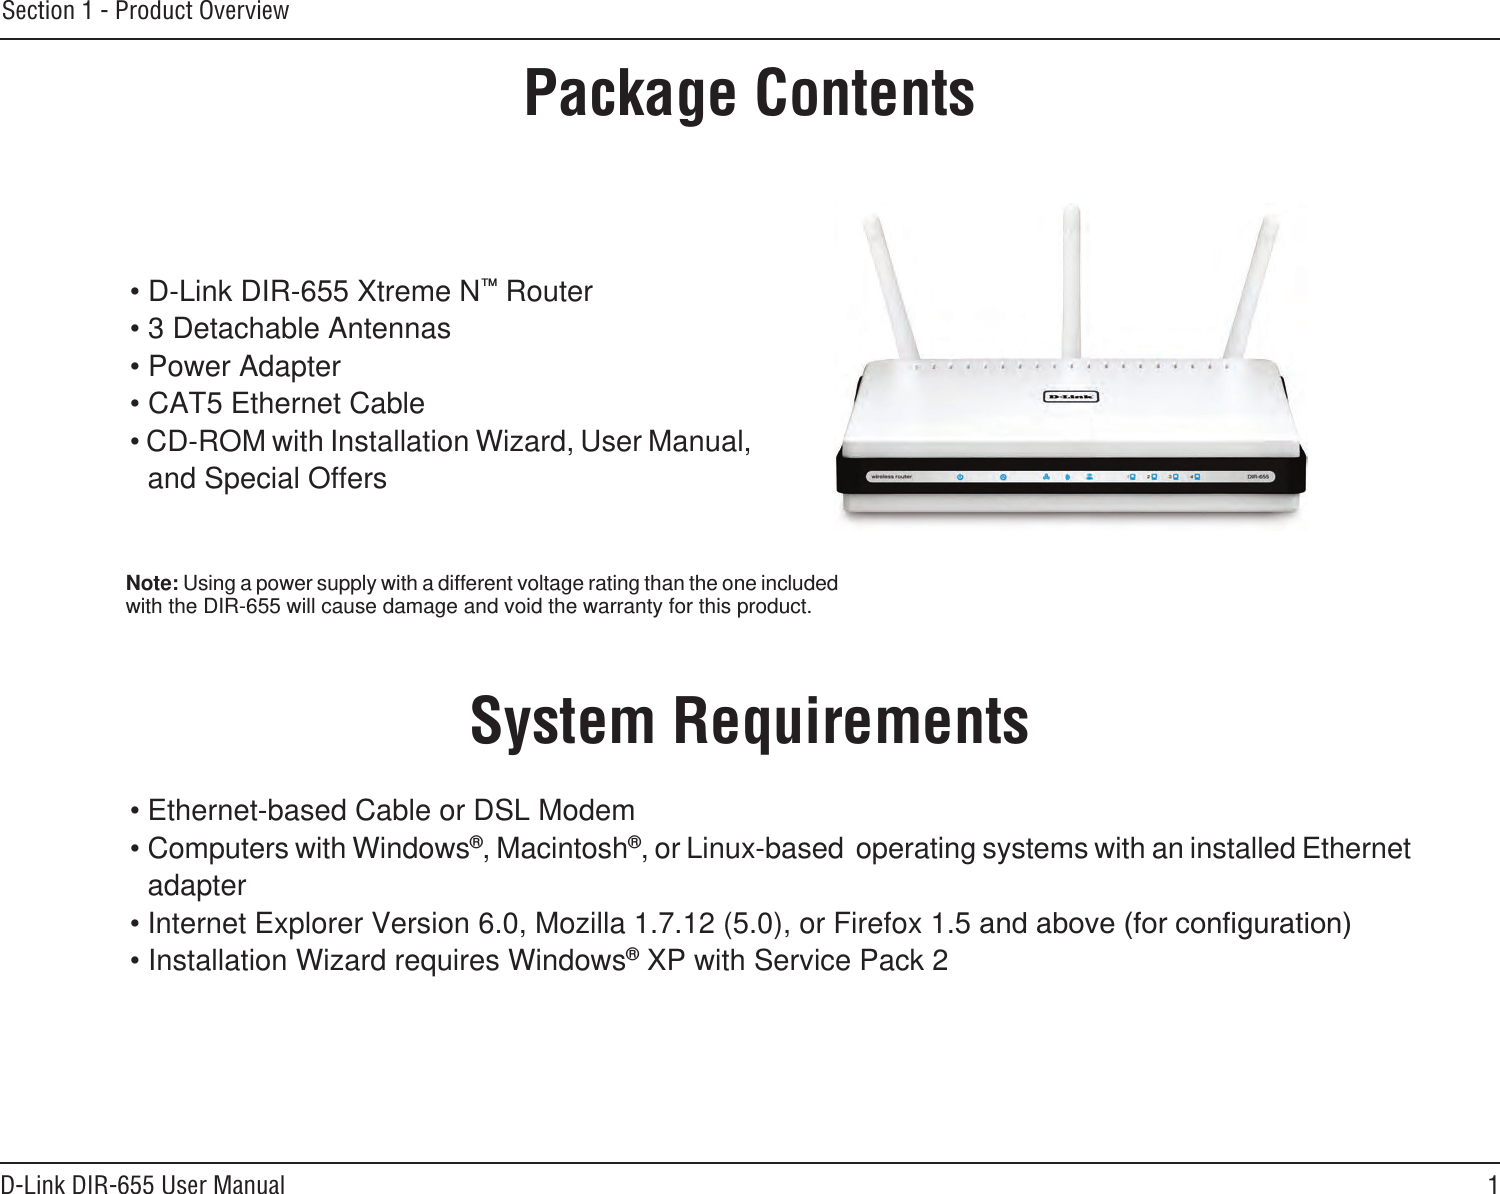 1D-Link DIR-655 User ManualSection 1 - Product Overview• D-Link DIR-655 Xtreme N™ Router• 3 Detachable Antennas• Power Adapter• CAT5 Ethernet Cable• CD-ROM with Installation Wizard, User Manual, and Special OffersSystem Requirements• Ethernet-based Cable or DSL Modem• Computers with Windows®, Macintosh®, or Linux-based  operating systems with an installed Ethernet adapter• Internet Explorer Version 6.0, Mozilla 1.7.12 (5.0), or Firefox 1.5• Installation Wizard requires Windows® XP with Service Pack 2Product OverviewPackage ContentsNote: Using a power supply with a different voltage rating than the one included with the DIR-655 will cause damage and void the warranty for this product.